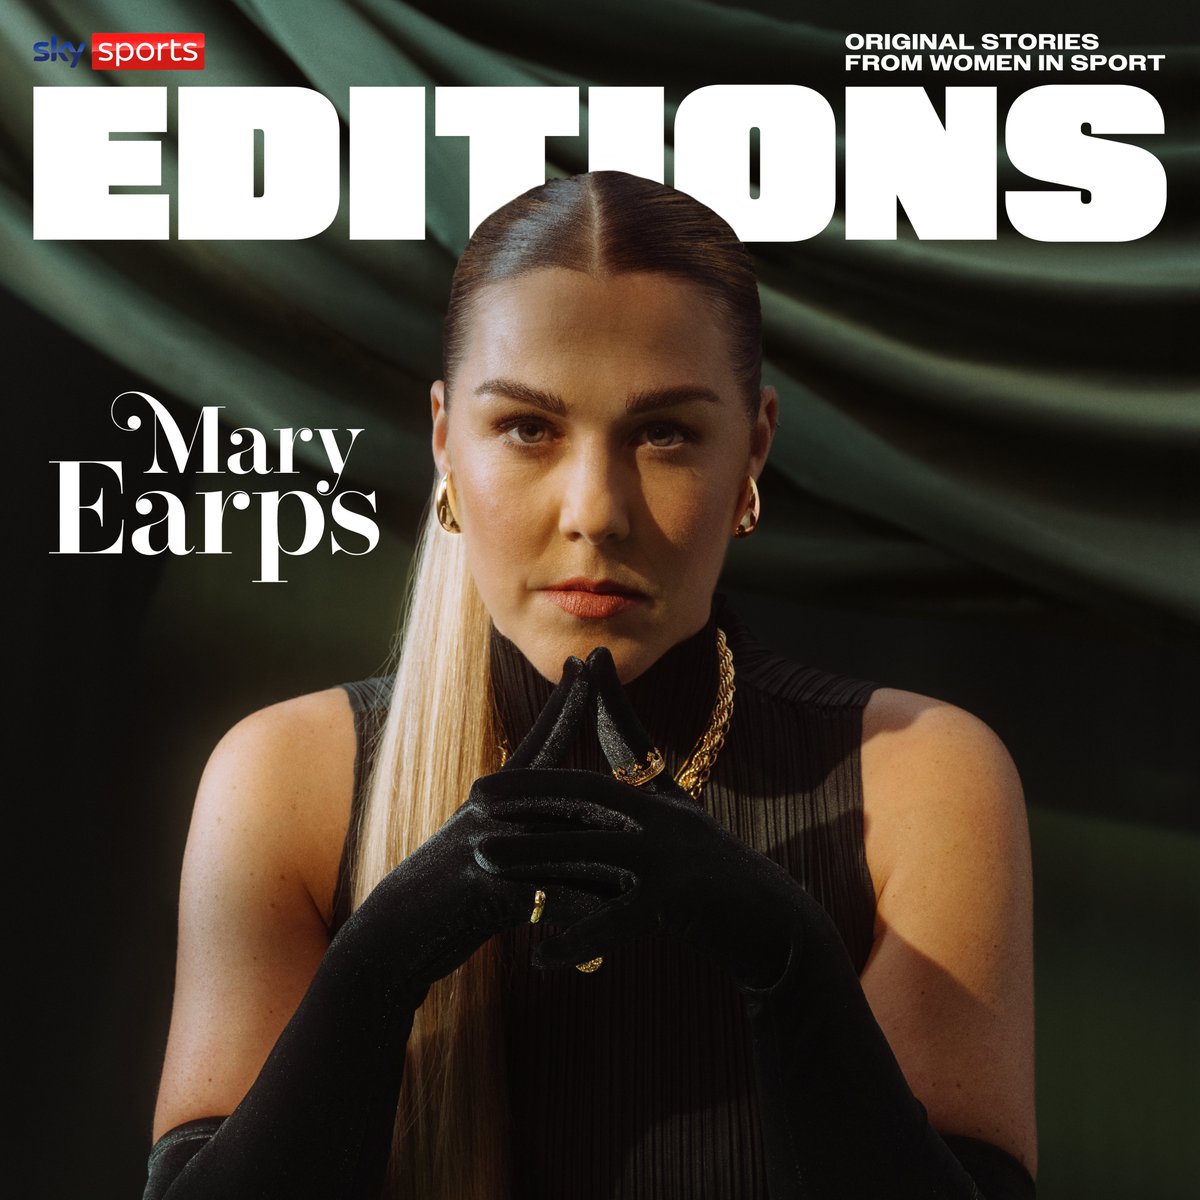 With 1.1m followers and 20.2m likes on TikTok, Mary Earps spoke about her use of social media while featured in the latest Sky Sports Editions. 🗣'When I was growing up I used to be constantly on and super intense. It was harder then to have that separation from my football. It